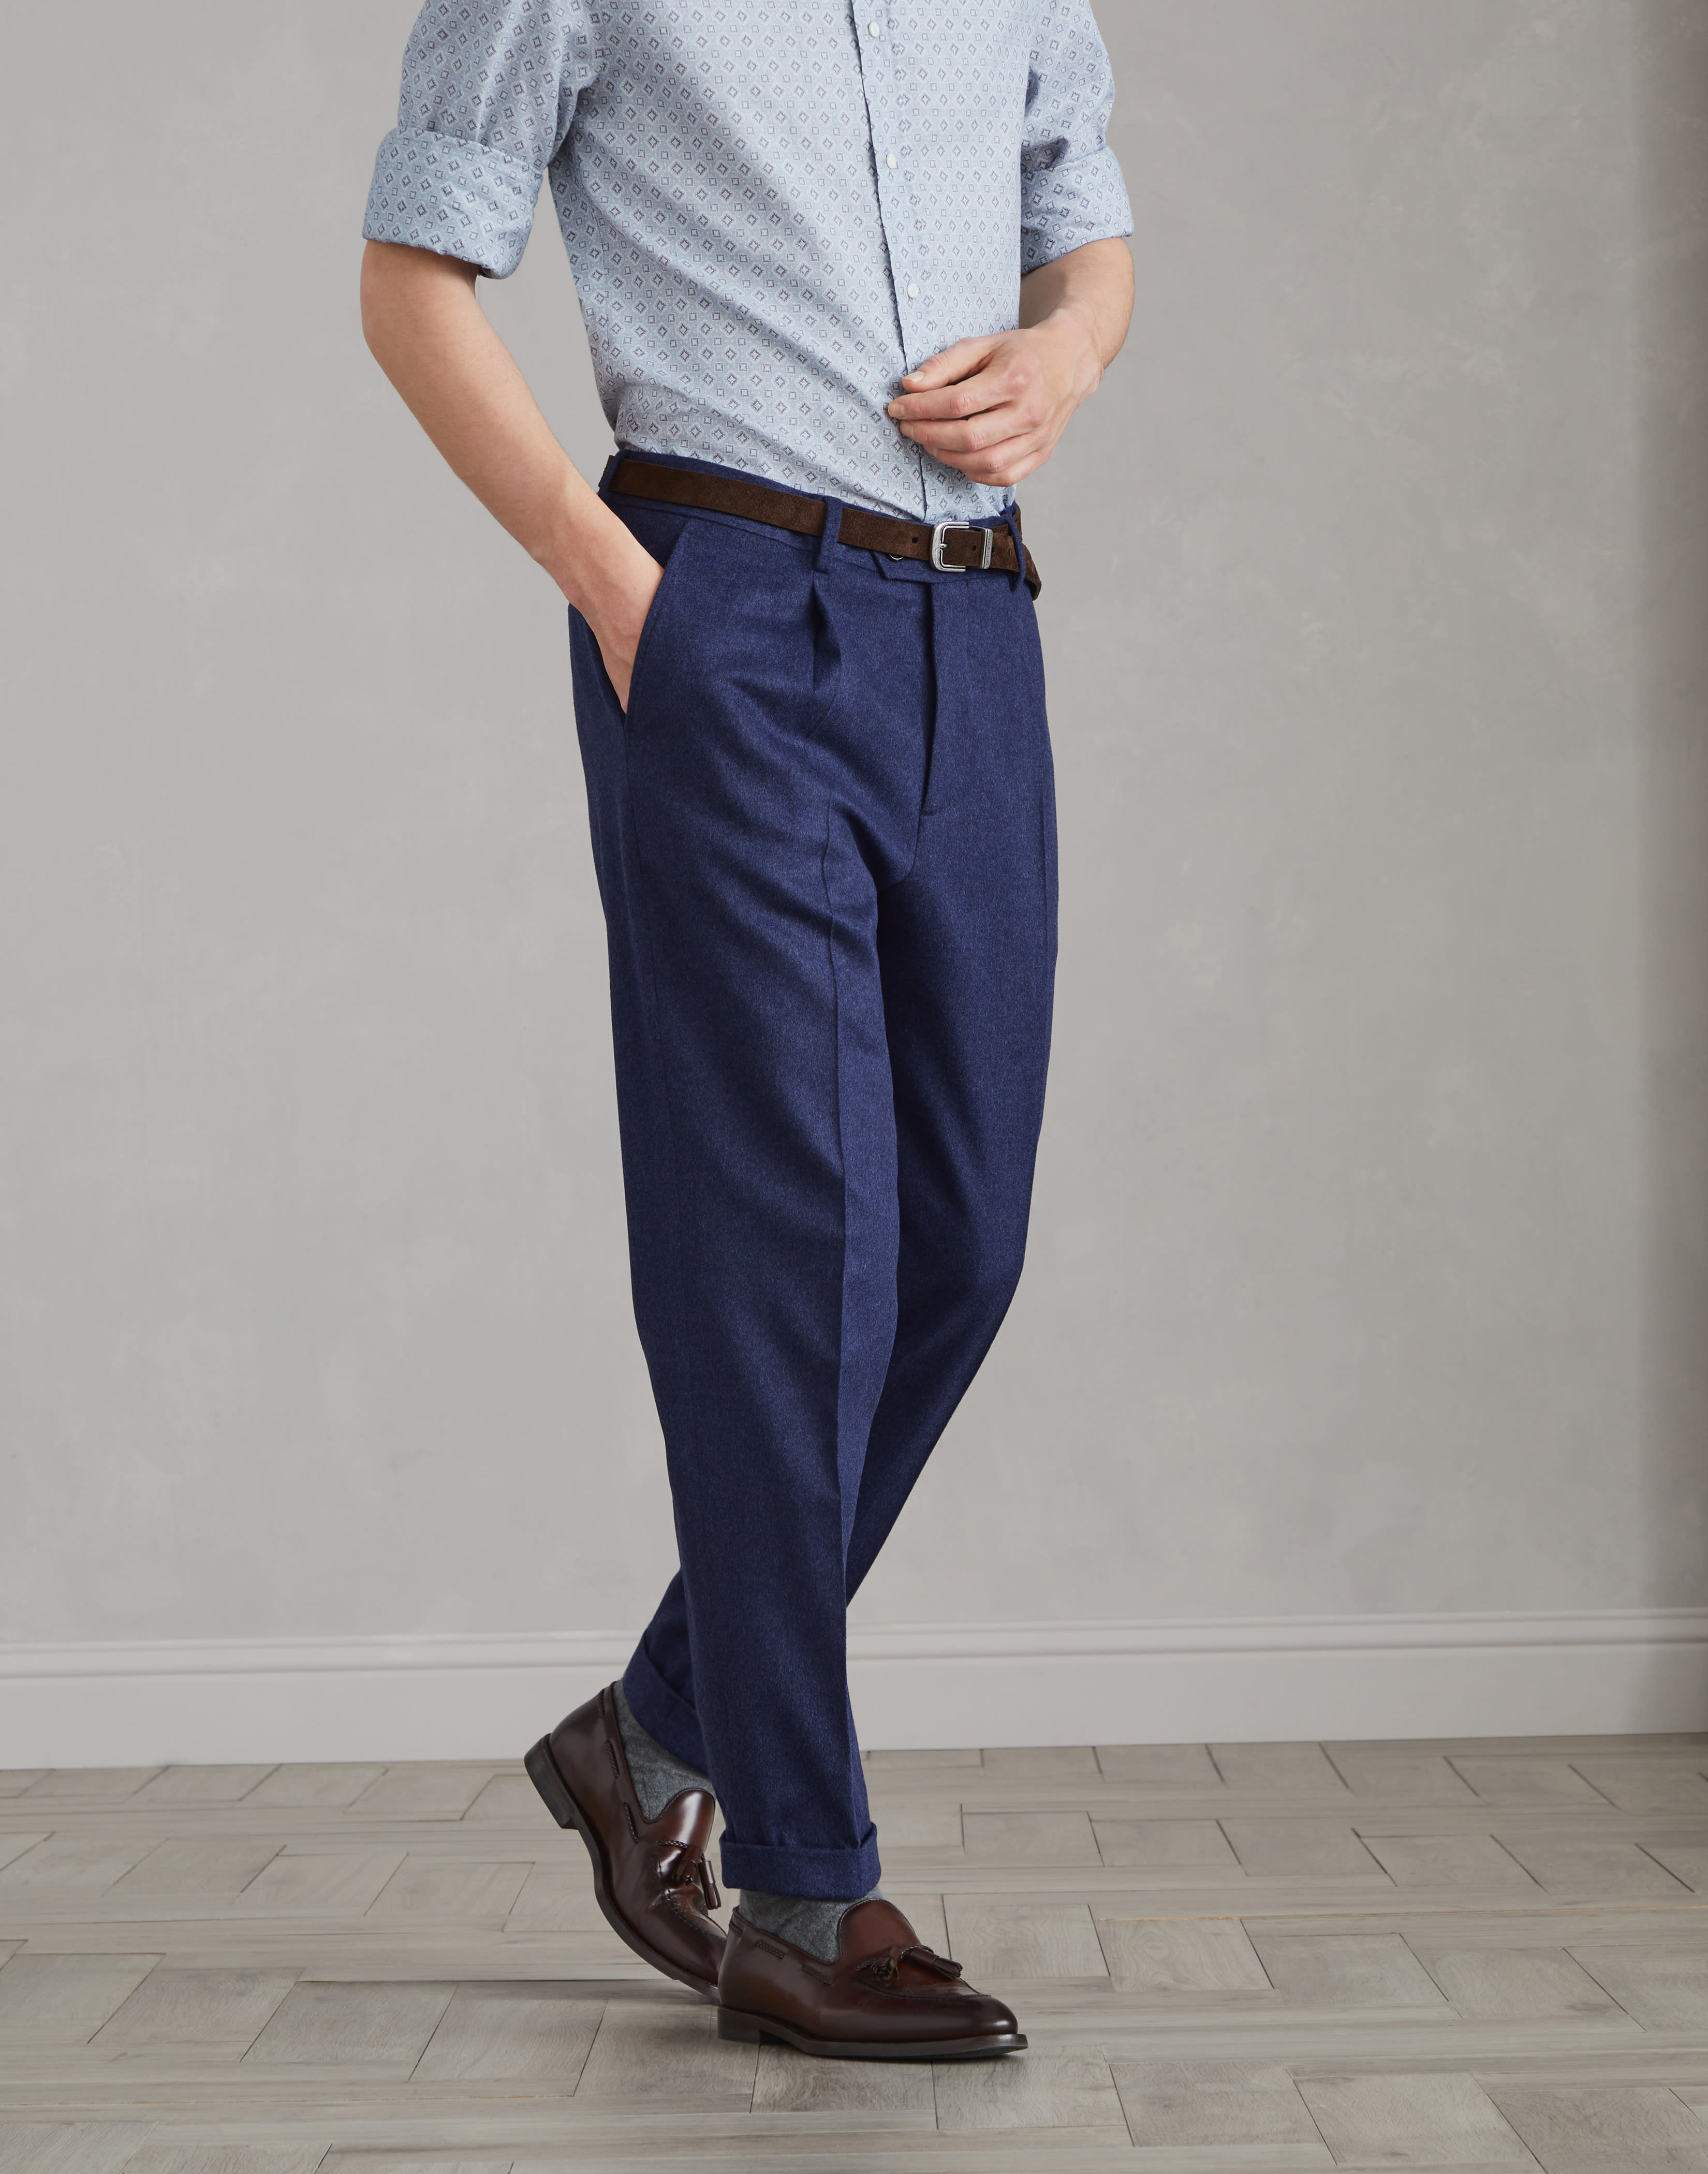 Flannel leisure fit trousers